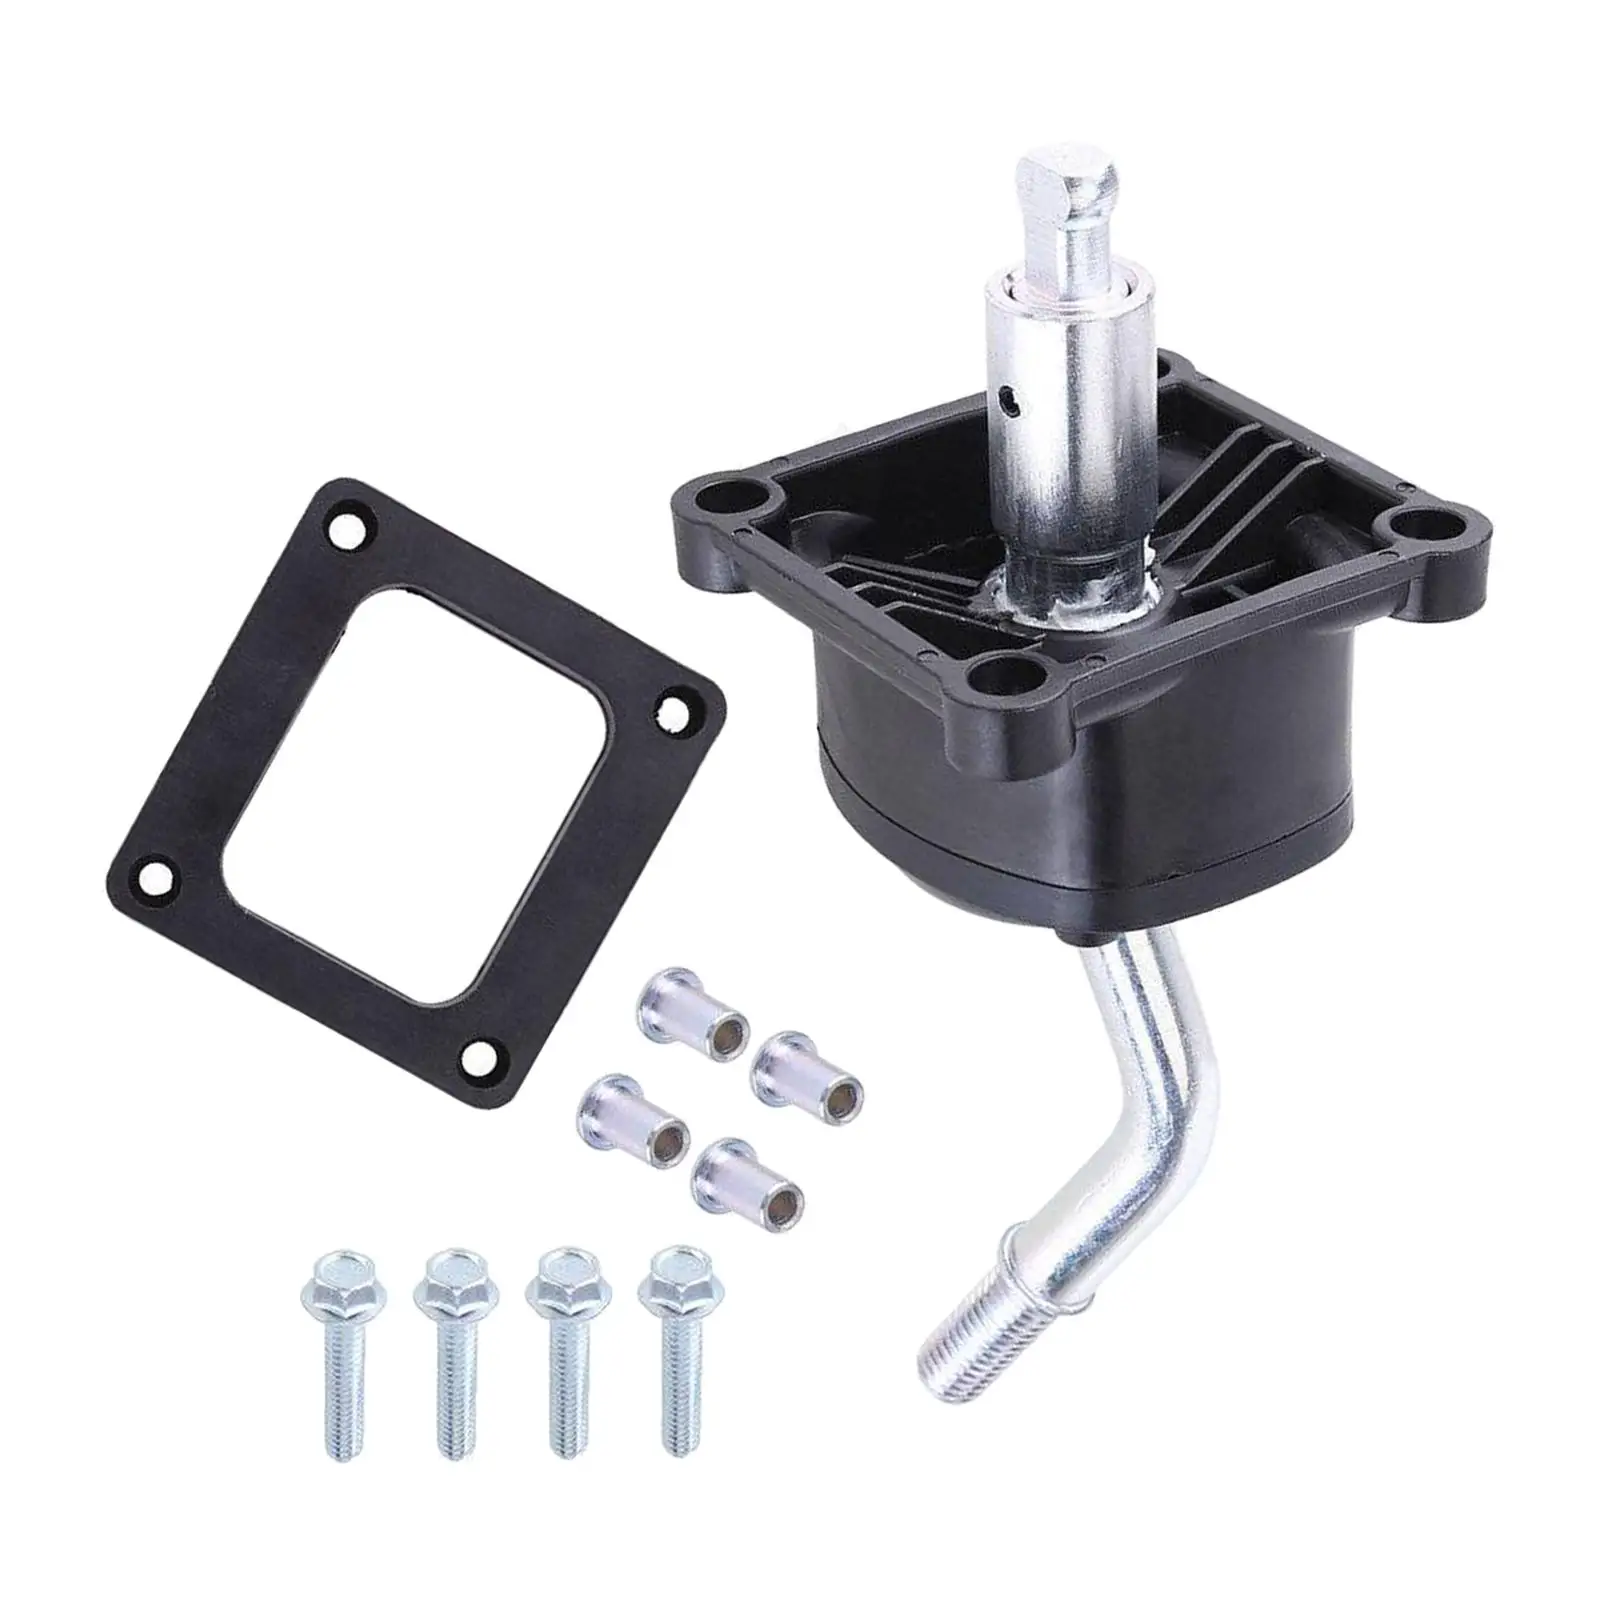 Shift Tower Assembly Kit Nv25982 Professional Accessory Good Performance Sturdy Replacement Parts